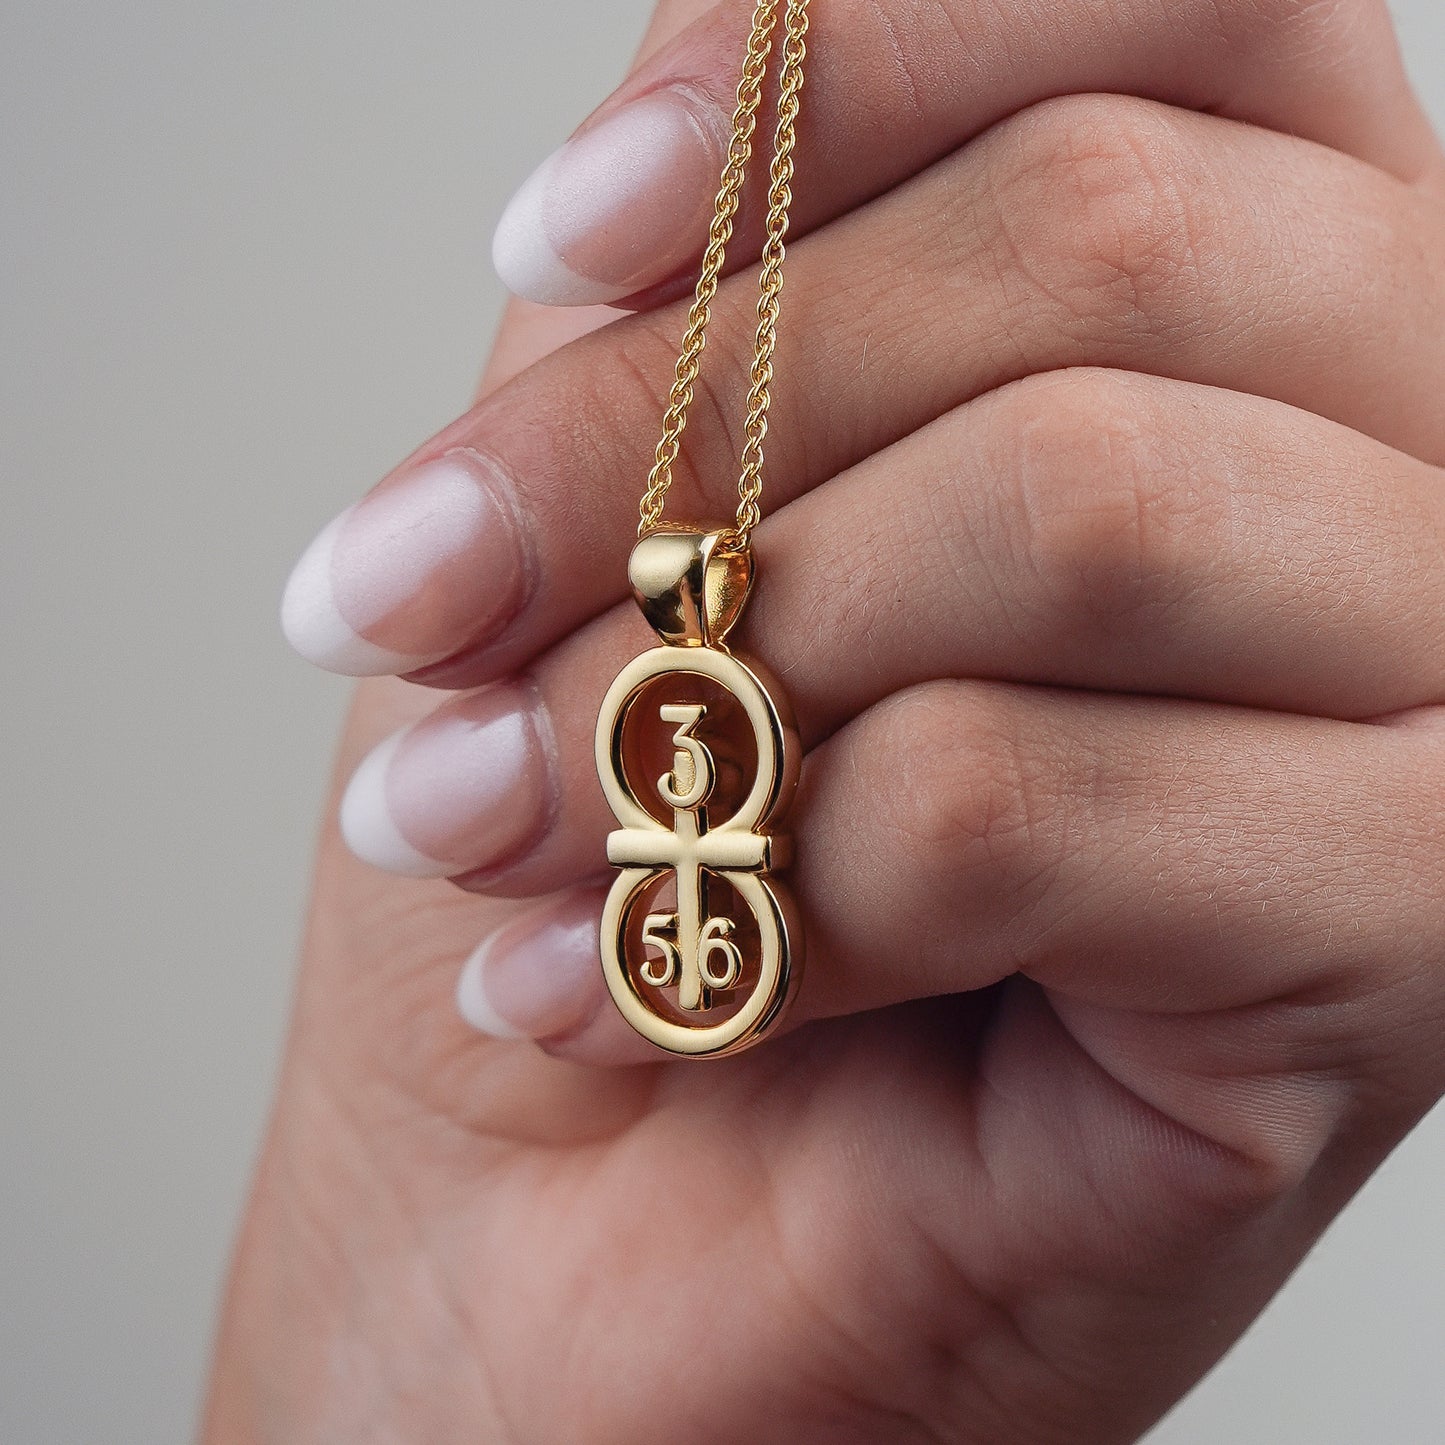 This picture displays our large pendant on our 14k gold filled wheat chain.  The pendant is draped over a hand for size comparison. Our RIYAN 29 and 11® pendant has the numbers 3, 5, and 6 intertwined with the cross to represent Proverbs 3:5-6 with the chapter word "Proverbs" inscribed on the back.